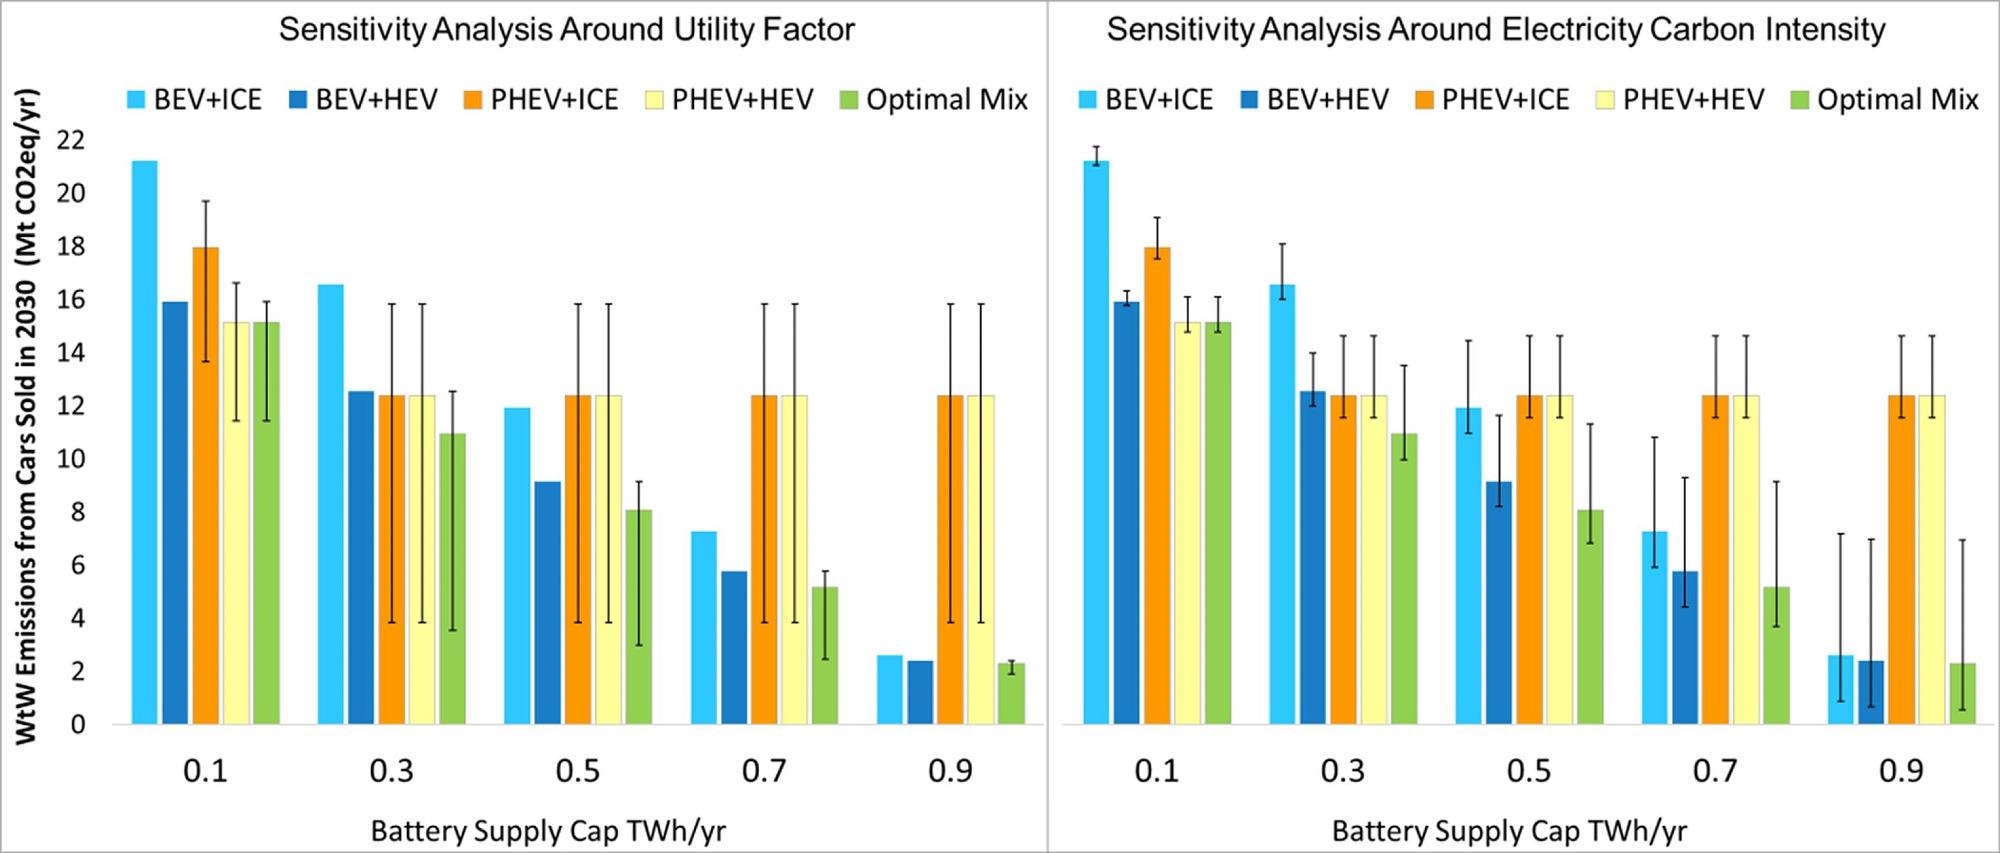 Comparison of minimized WTW GHG emissions subject to battery supply cap in different sales mix scenarios (left chart: error bars show the sensitivities with respect to utility factor ranging from 20% to 90%; right chart: error bars show the sensitivities with respect to the carbon intensity of electricity supply mix ranging from 0 to 76.4 gCO2eq/MJ) — Note: the baseline composition of ‘Optimal Mix’ is defined in Fig. 1.